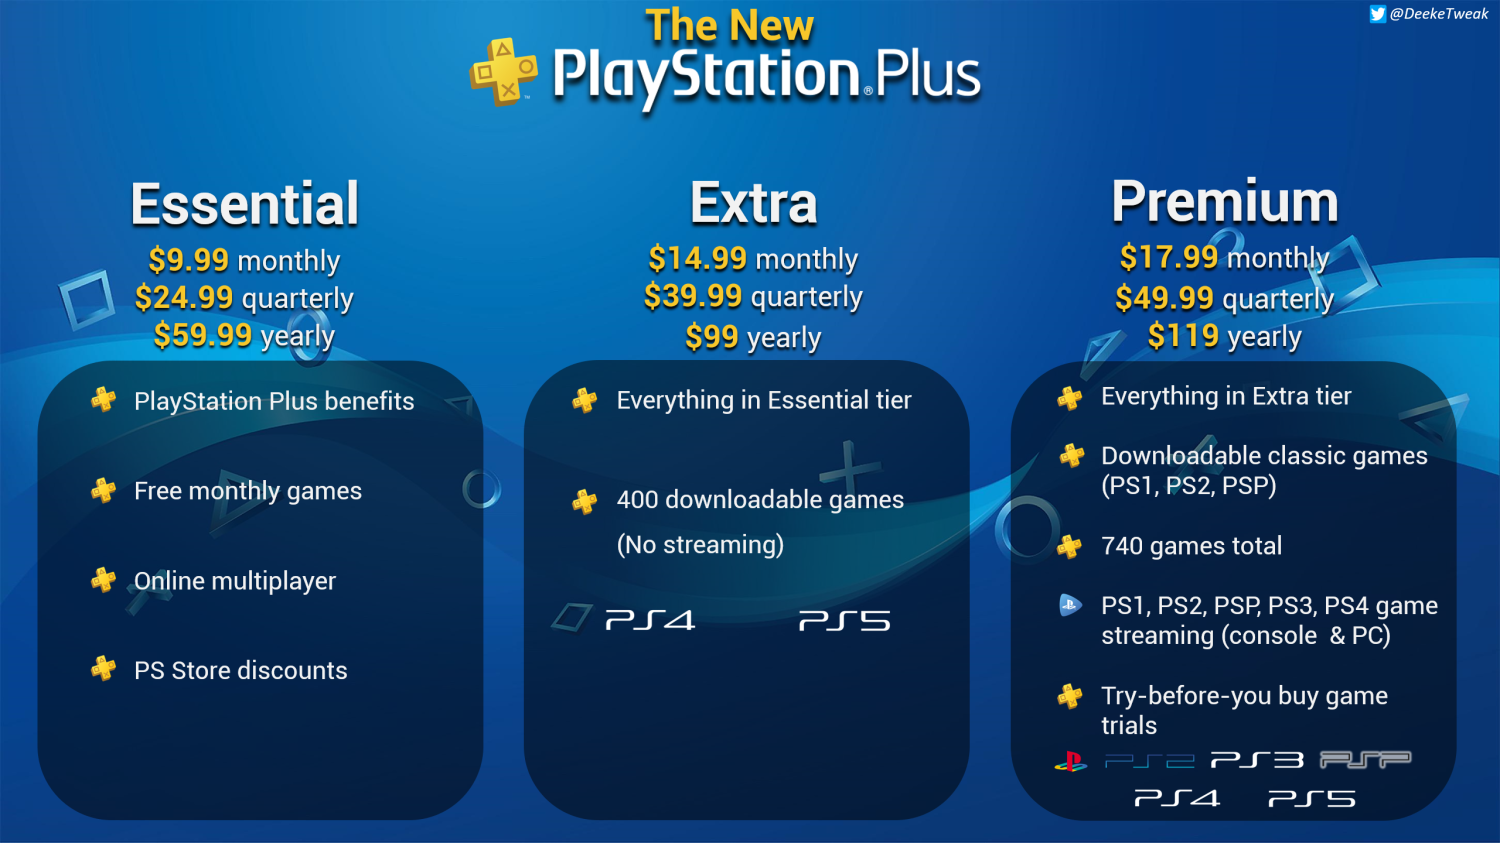 PS Plus/PS Now Card Conversion Rates (All Countries, so far) : r/ PlayStationPlus